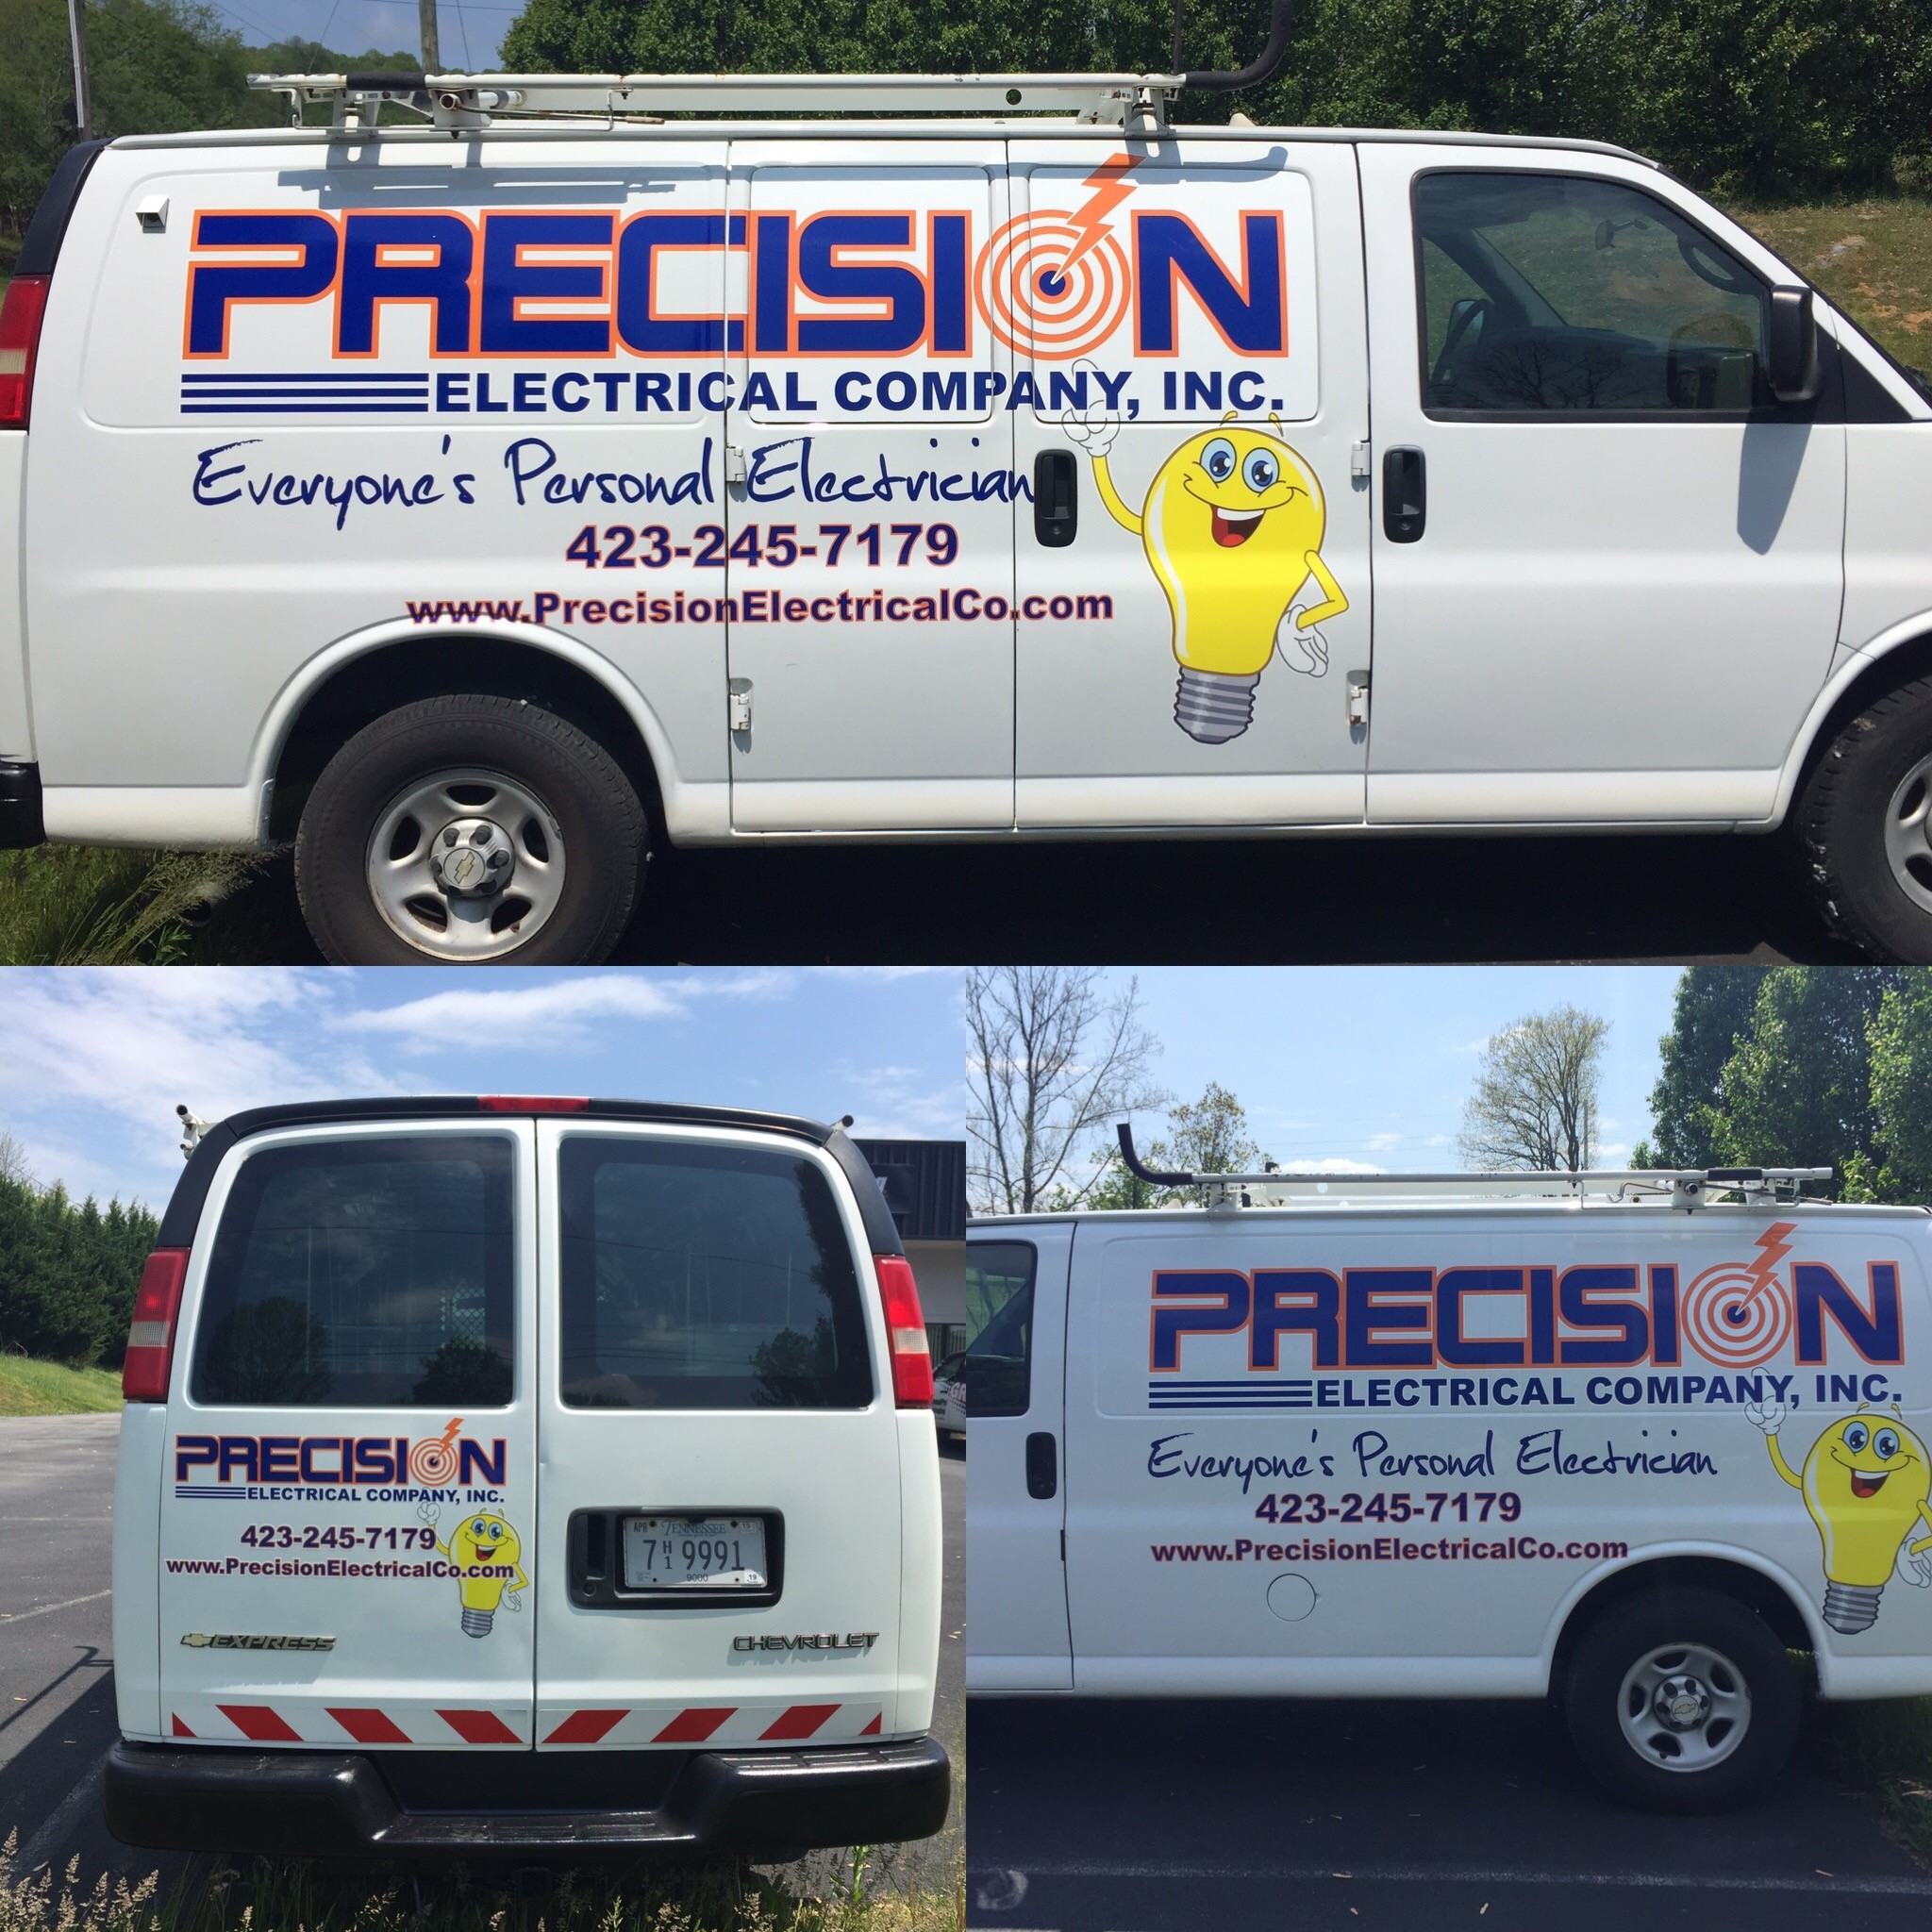 Precision Electrical Company vehicle decals